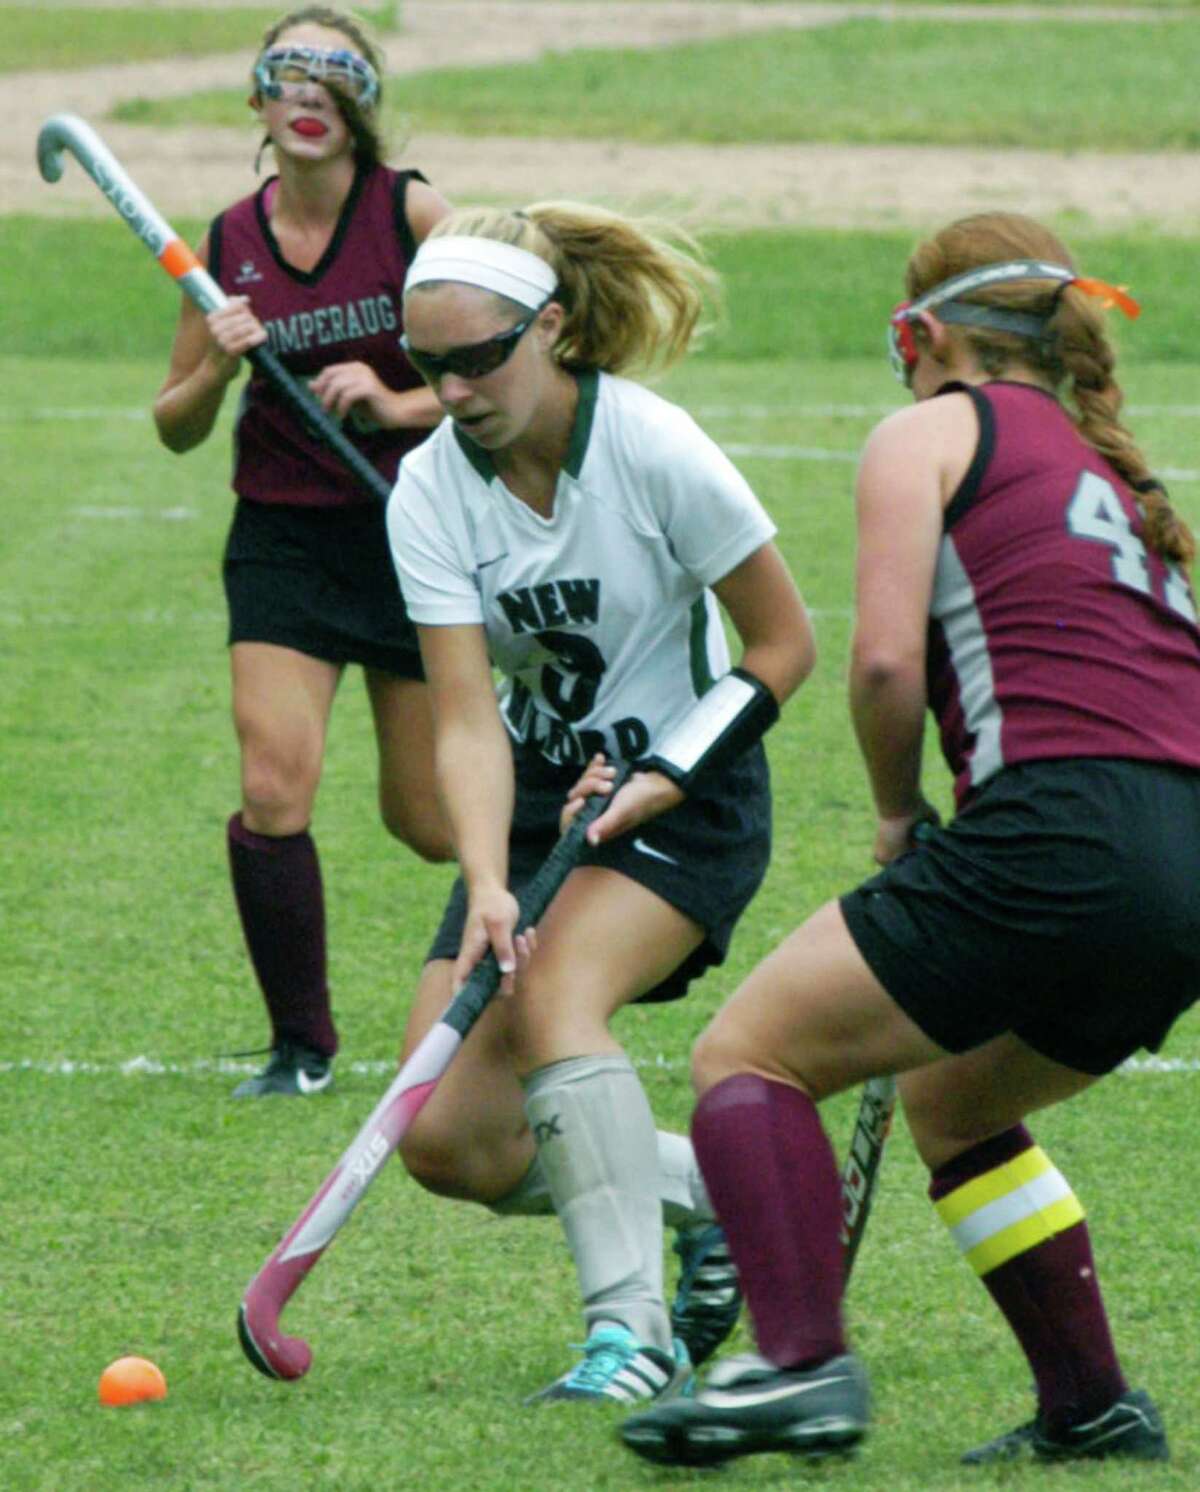 Brittney Dubret of the Green Wave gains possession during New Milford High School field hockey's 2-1 victory over Pomperaug, Sept. 16, 2014 at NMHS.